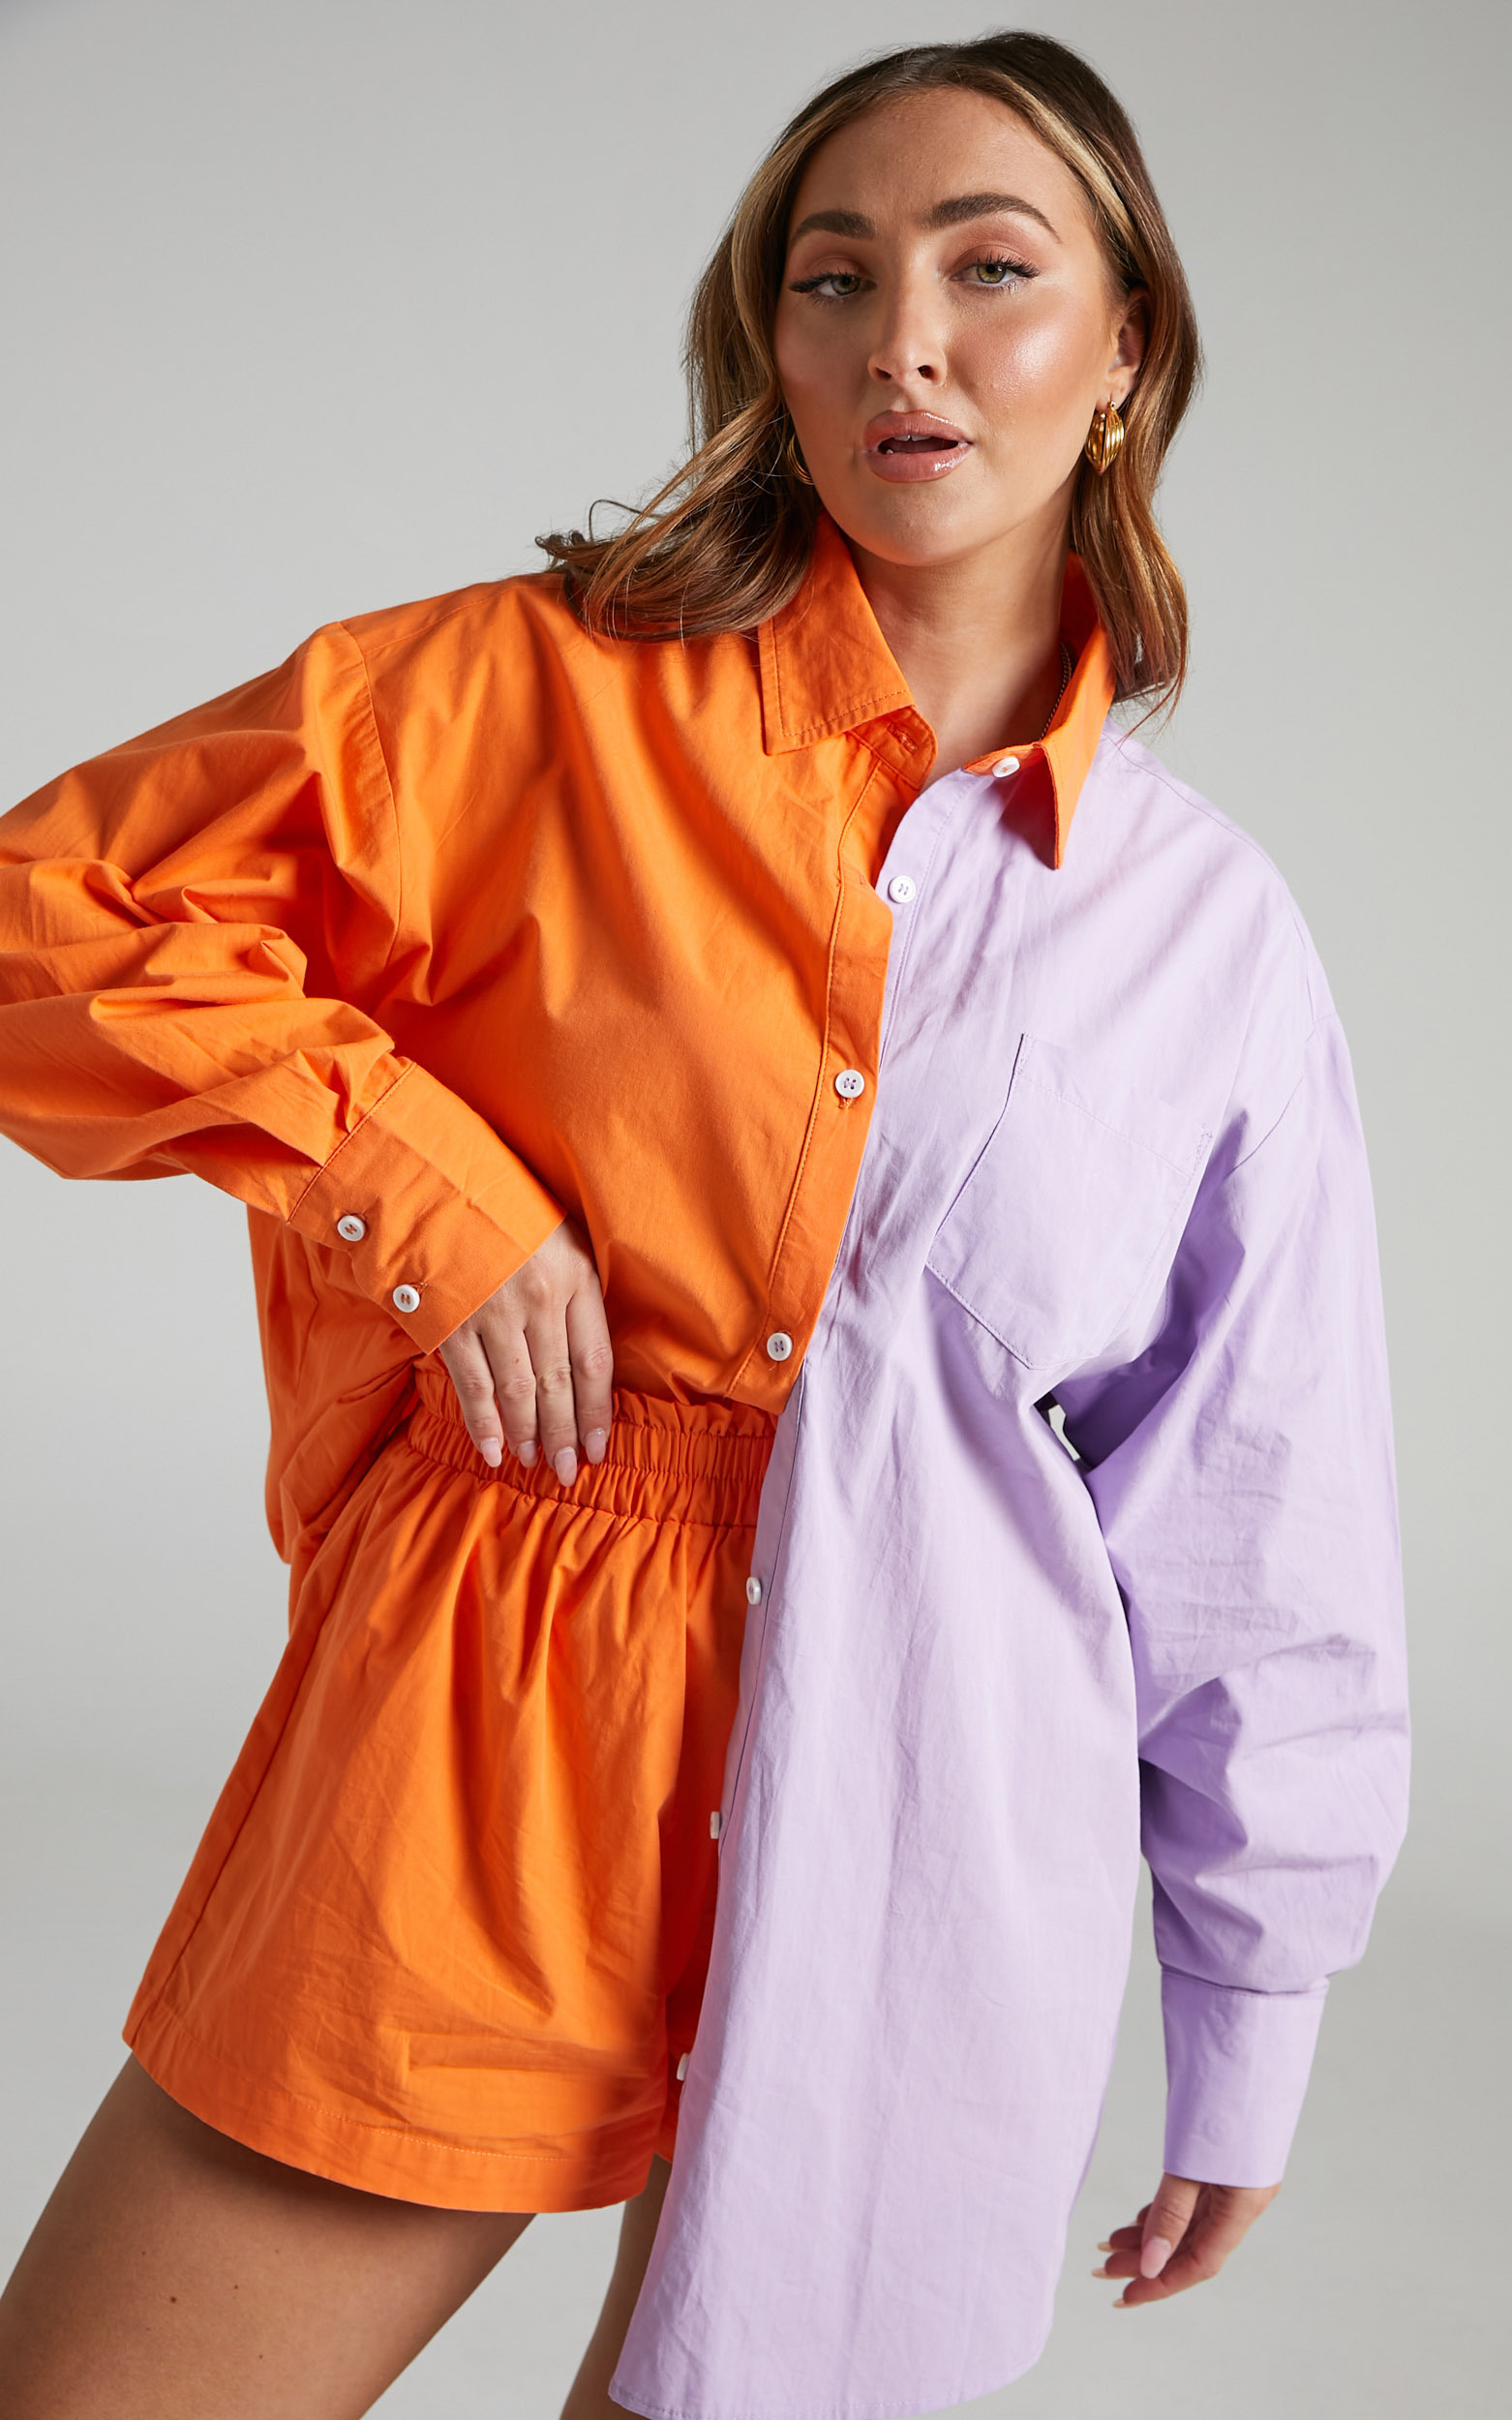 Roewe Colour Block Oversized Button Up Shirt in Orange & Lilac - 04, ORG4, hi-res image number null